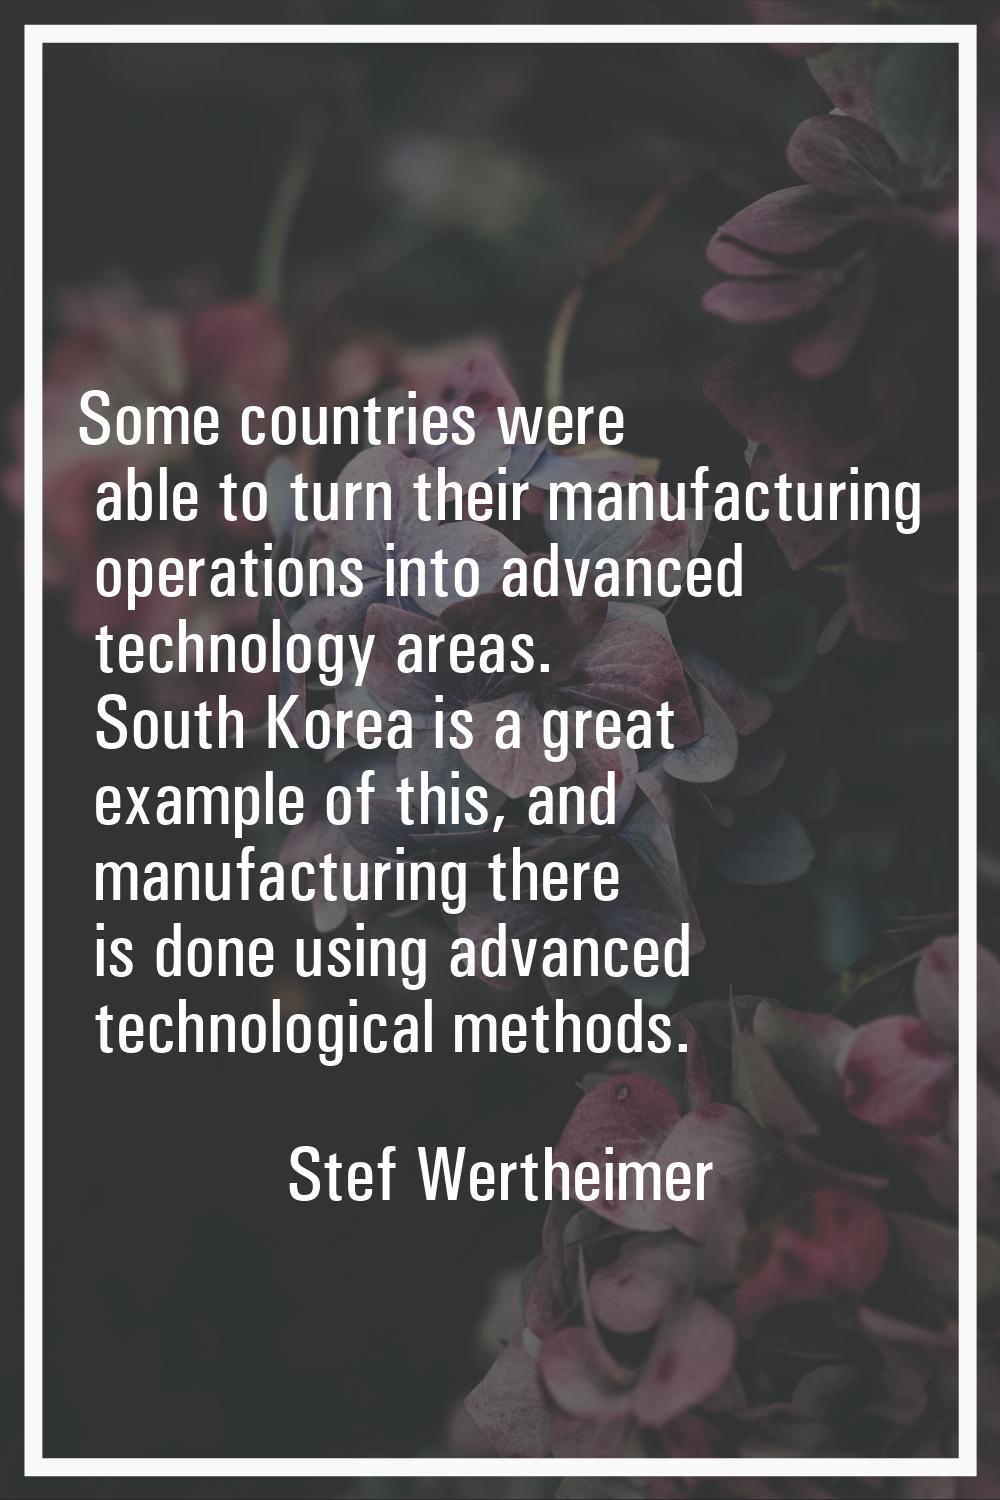 Some countries were able to turn their manufacturing operations into advanced technology areas. Sou